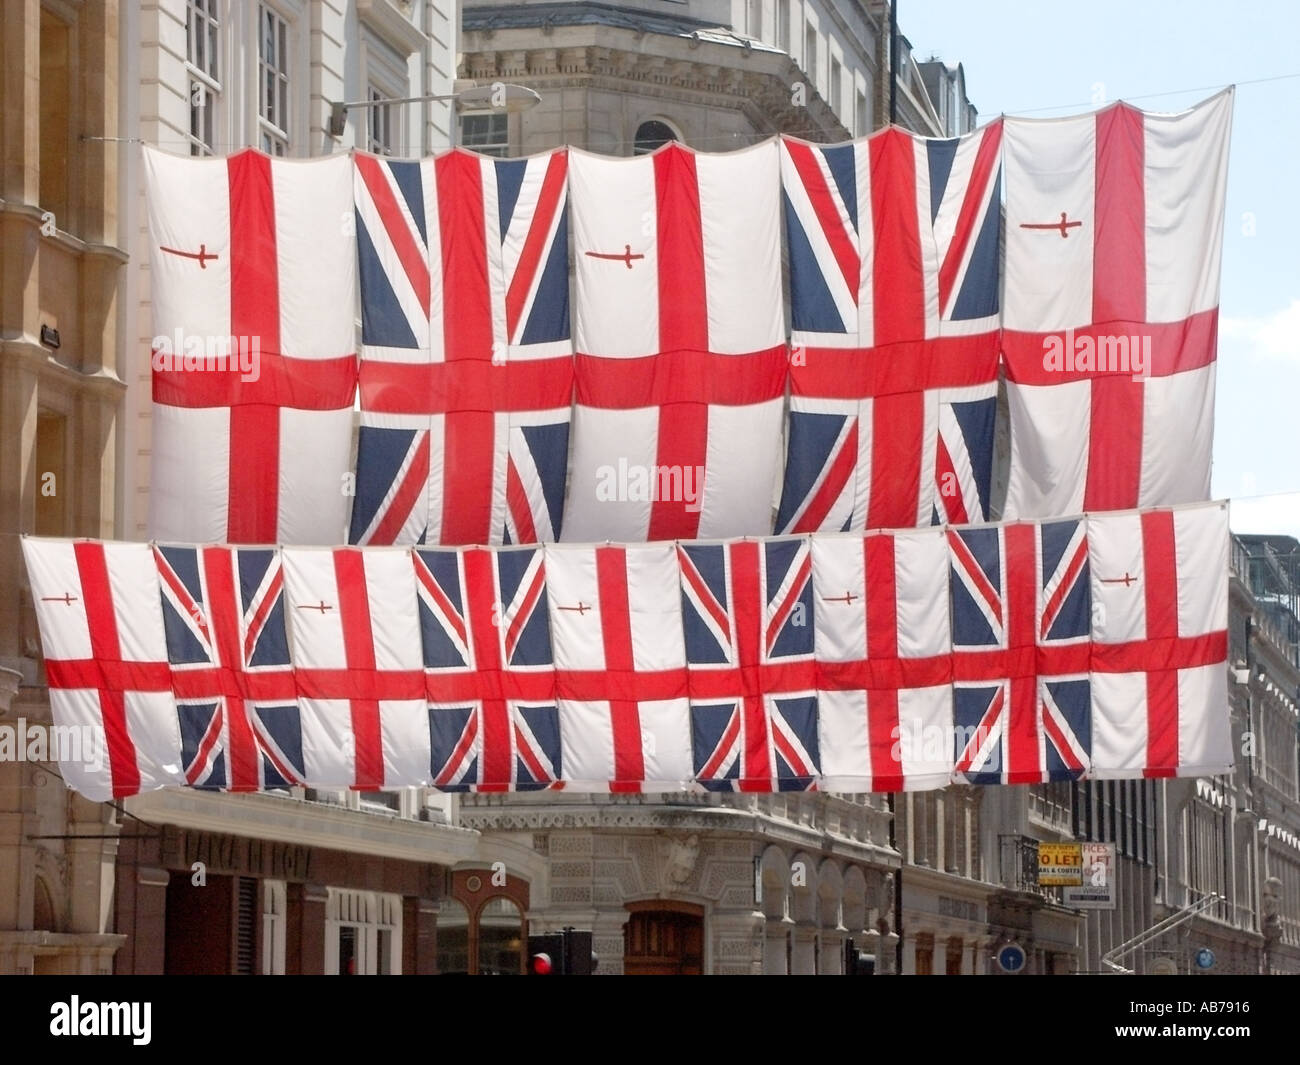 City of London close to The Guildhall Union Flags and flag of St George hung as bunting across main entrance approach road Stock Photo